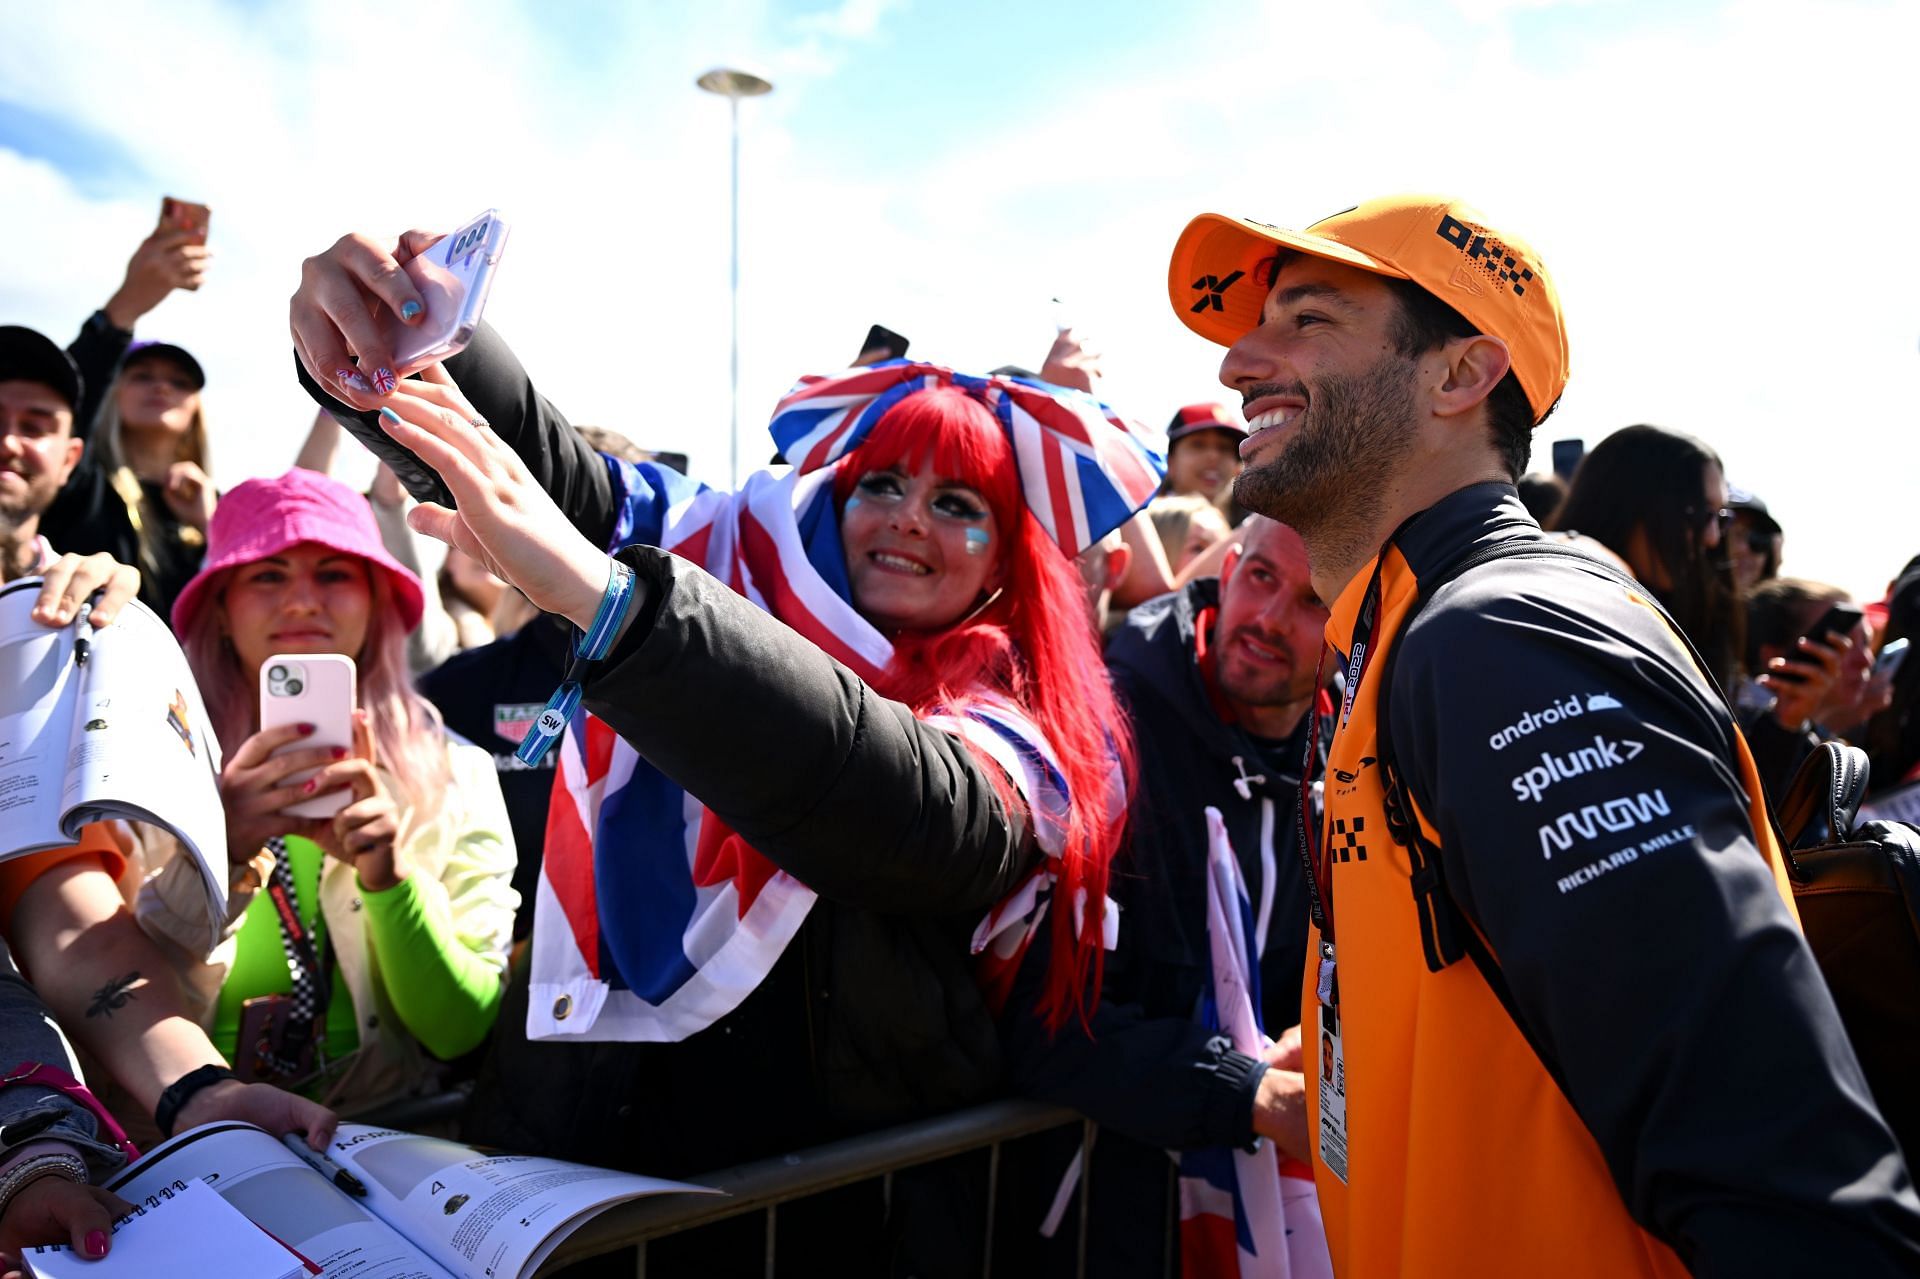 Daniel Ricciardo needs a strong result this weekend